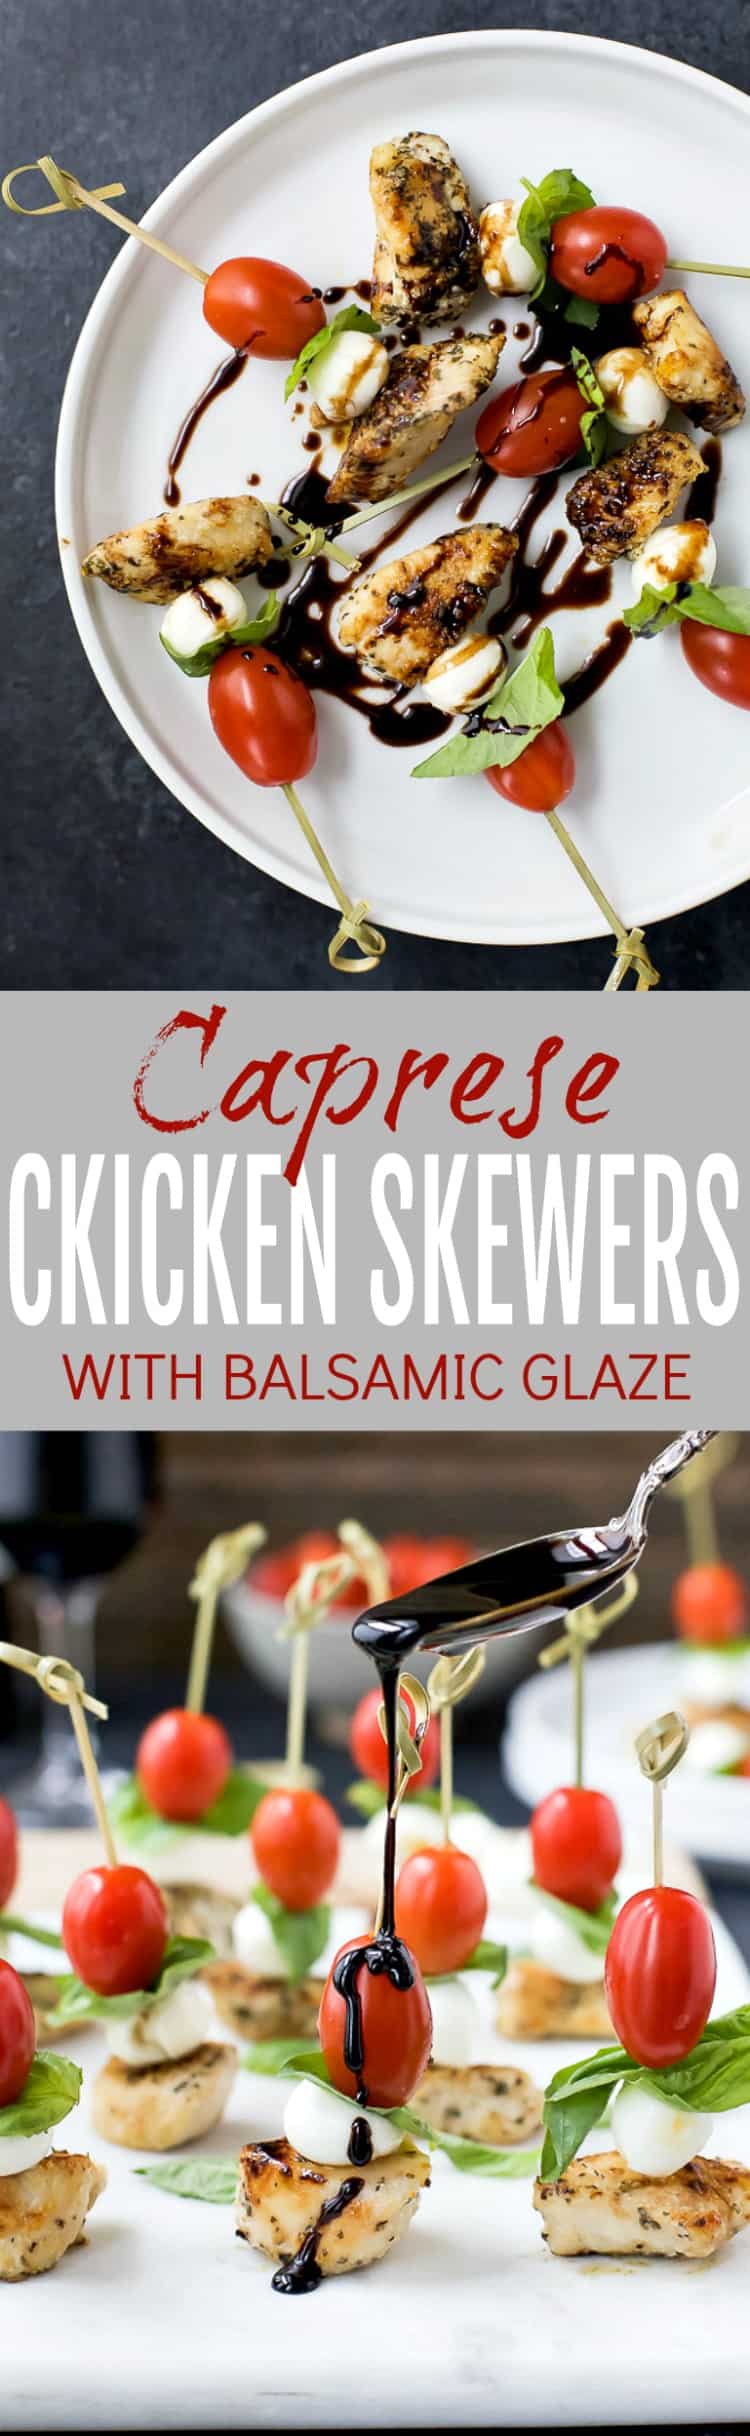 Caprese Chicken Skewers drizzled with Balsamic Glaze